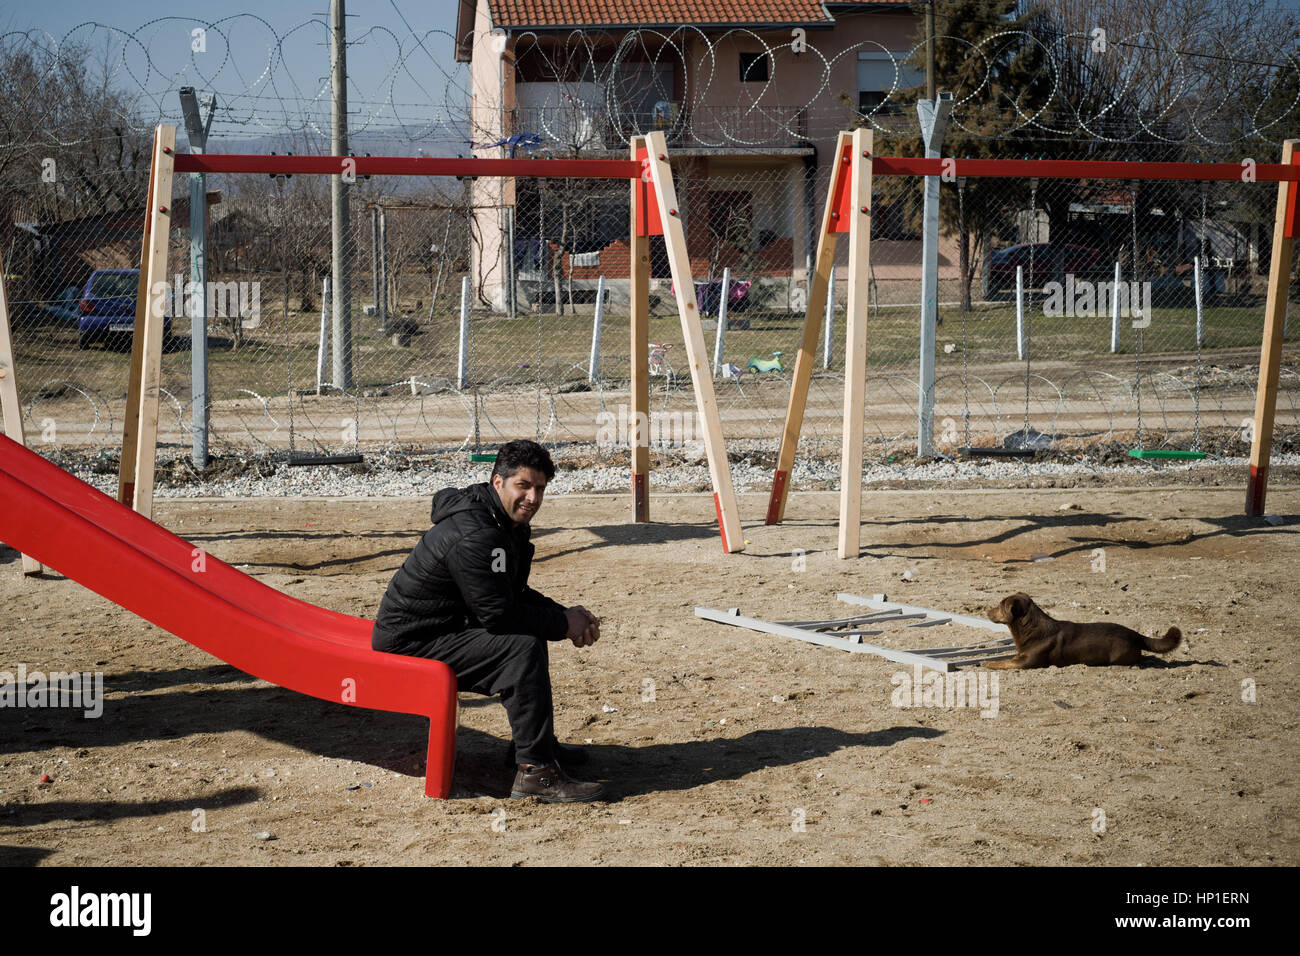 Tabanovce, Macedonia. 16th February 2017. Mohammad Shafi Abid from Kabul, Afghanistan, spends time sitting on a slide for refugee children at the Temporary Transit Center in Tabanovce, north Macedonia in the border with Serbia. Mohammad and his wife, 4 months pregnant, arrived at camp a month and a half ago after spending about $ 15,000 paid to smugglers. Smugglers robbed them, beat them up and abandoned them in the countryside when it began to snow. Mohammad  fled from Afghanistan after receiving death threats for working in Kabul for North American organizations. At the Temporary Transit Cen Stock Photo